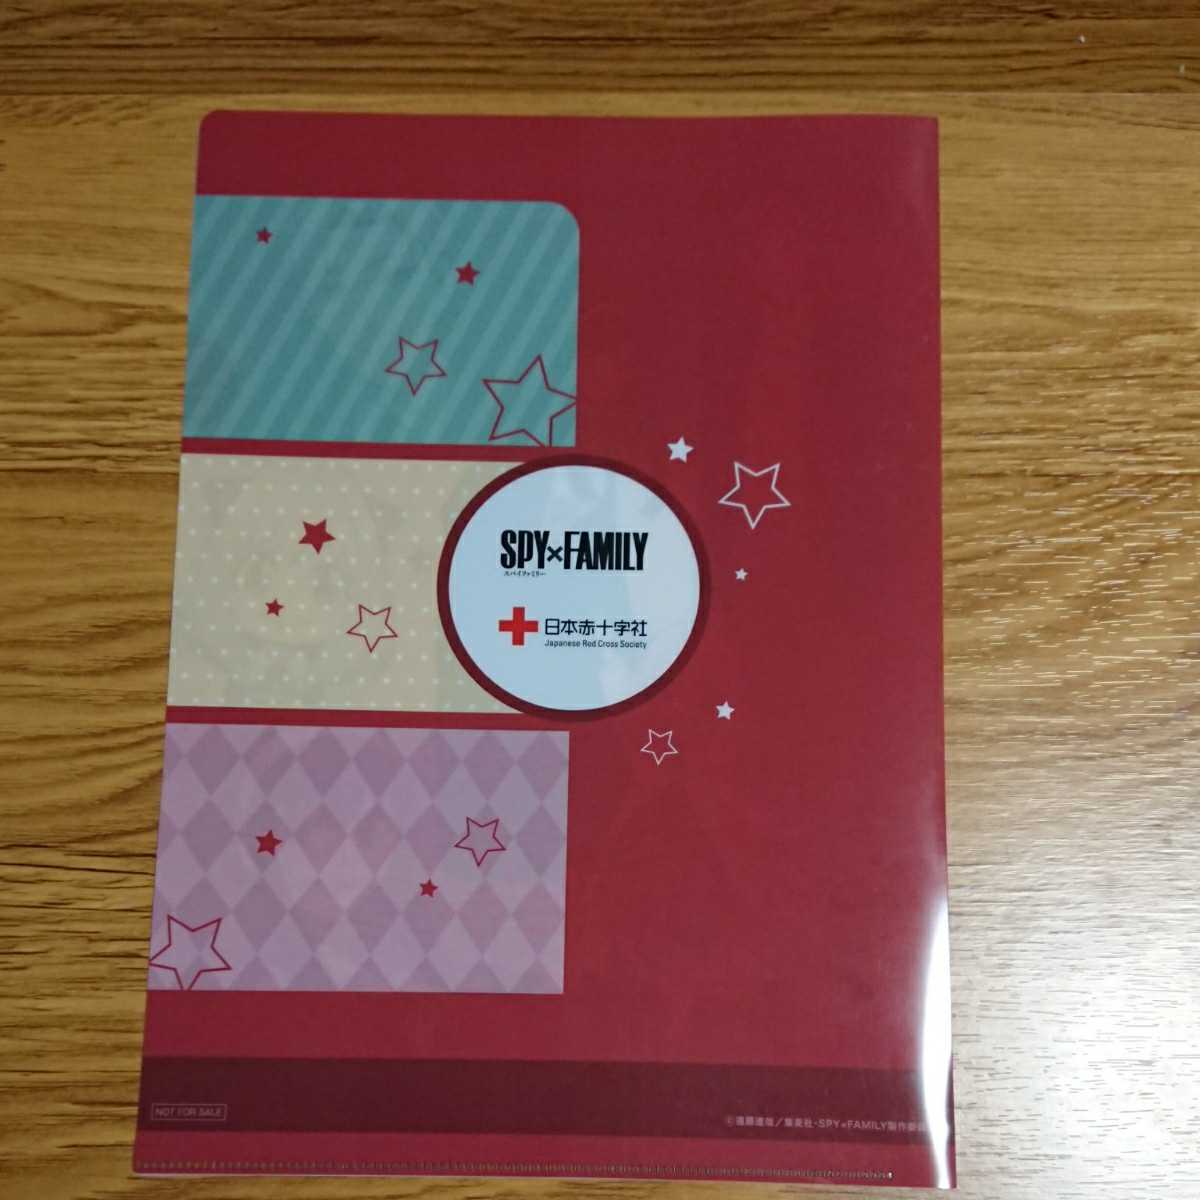  Spy Family SPY×FAMILY/A4 clear file /.. souvenir Japan red 10 character company / not for sale 